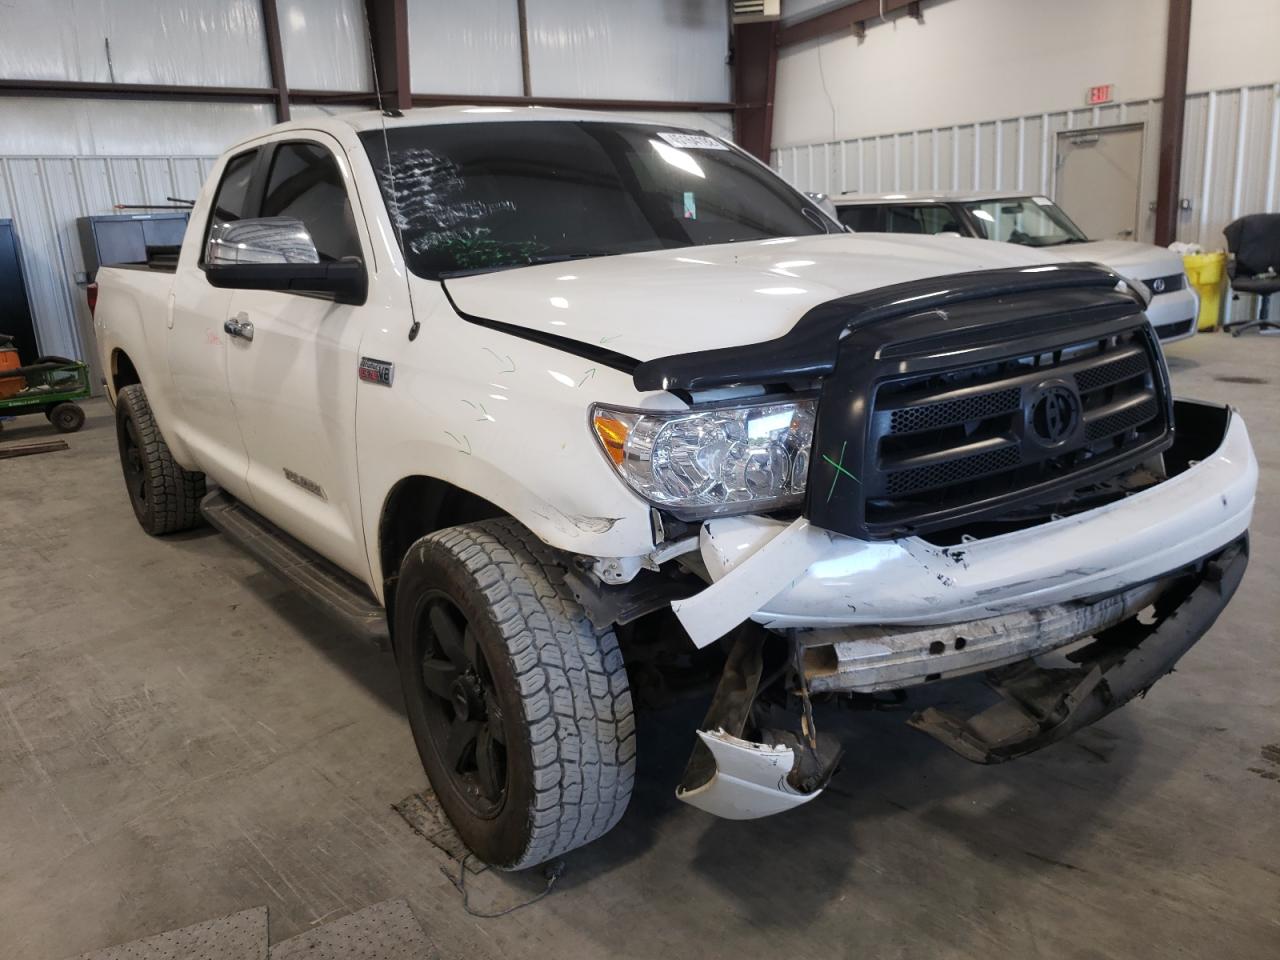 2011 TOYOTA TUNDRA DOUBLE CAB LIMITED VIN: 5TFBY5F15BX203281